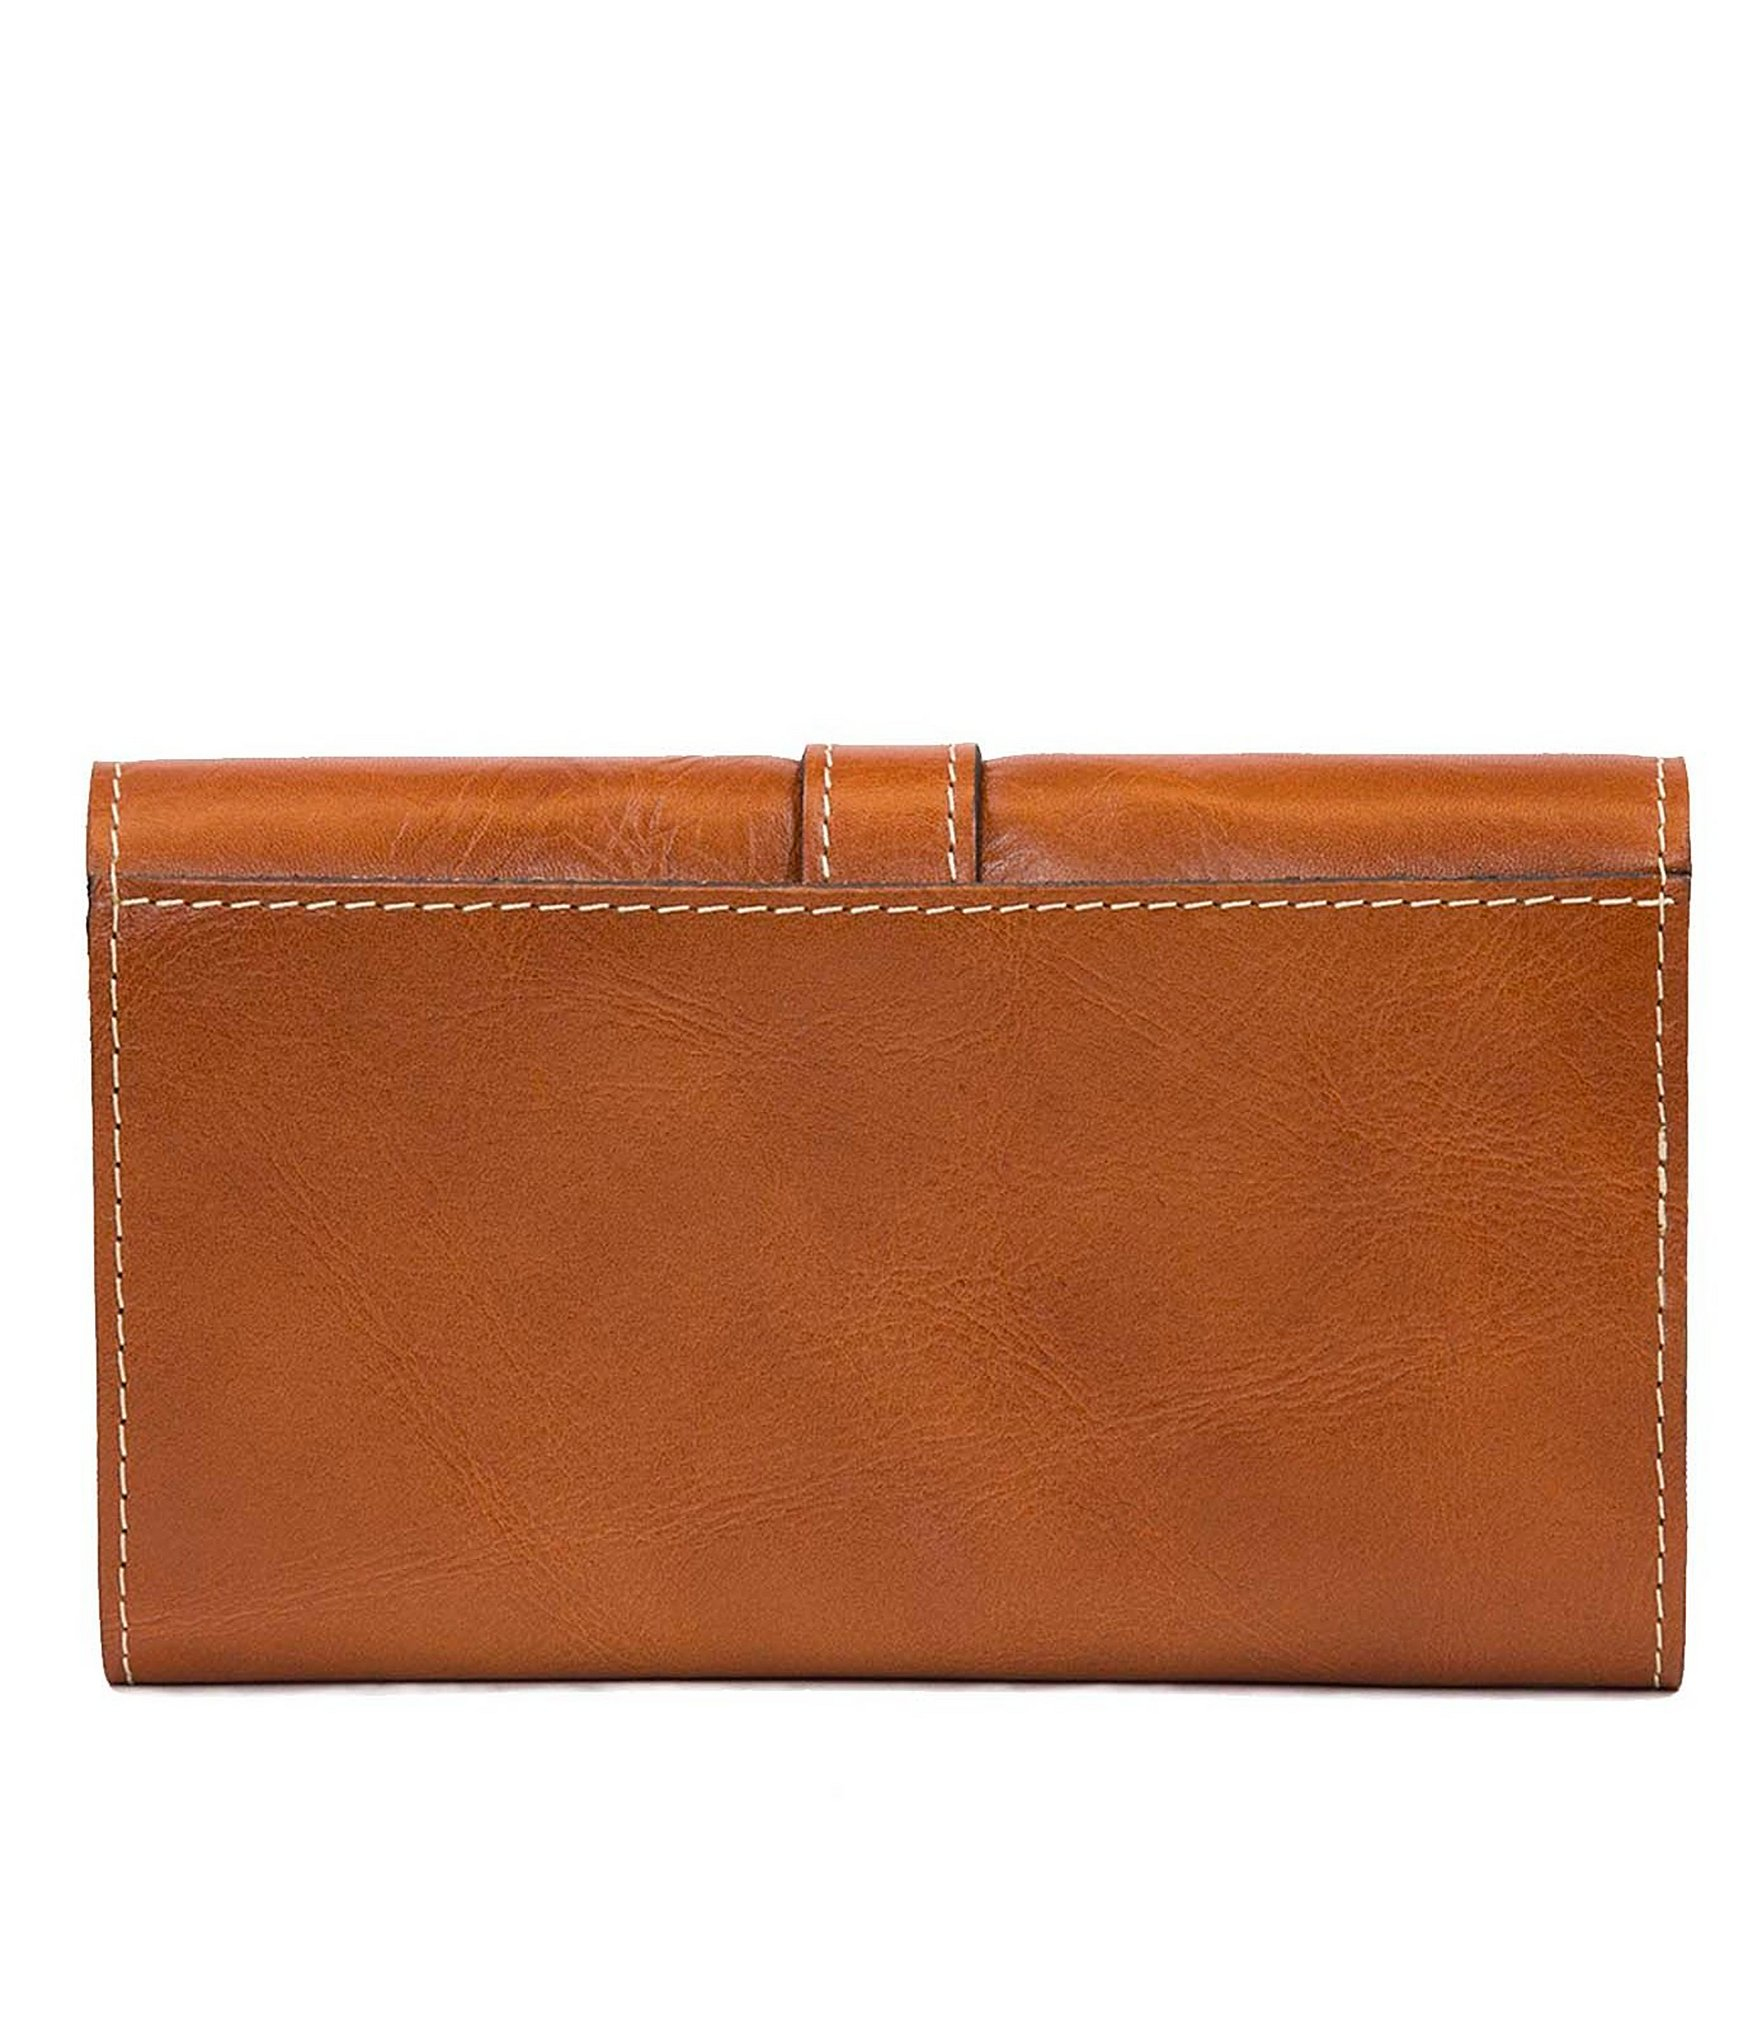 Lyst - Patricia Nash Heritage Collection Murcia Wallet in Brown